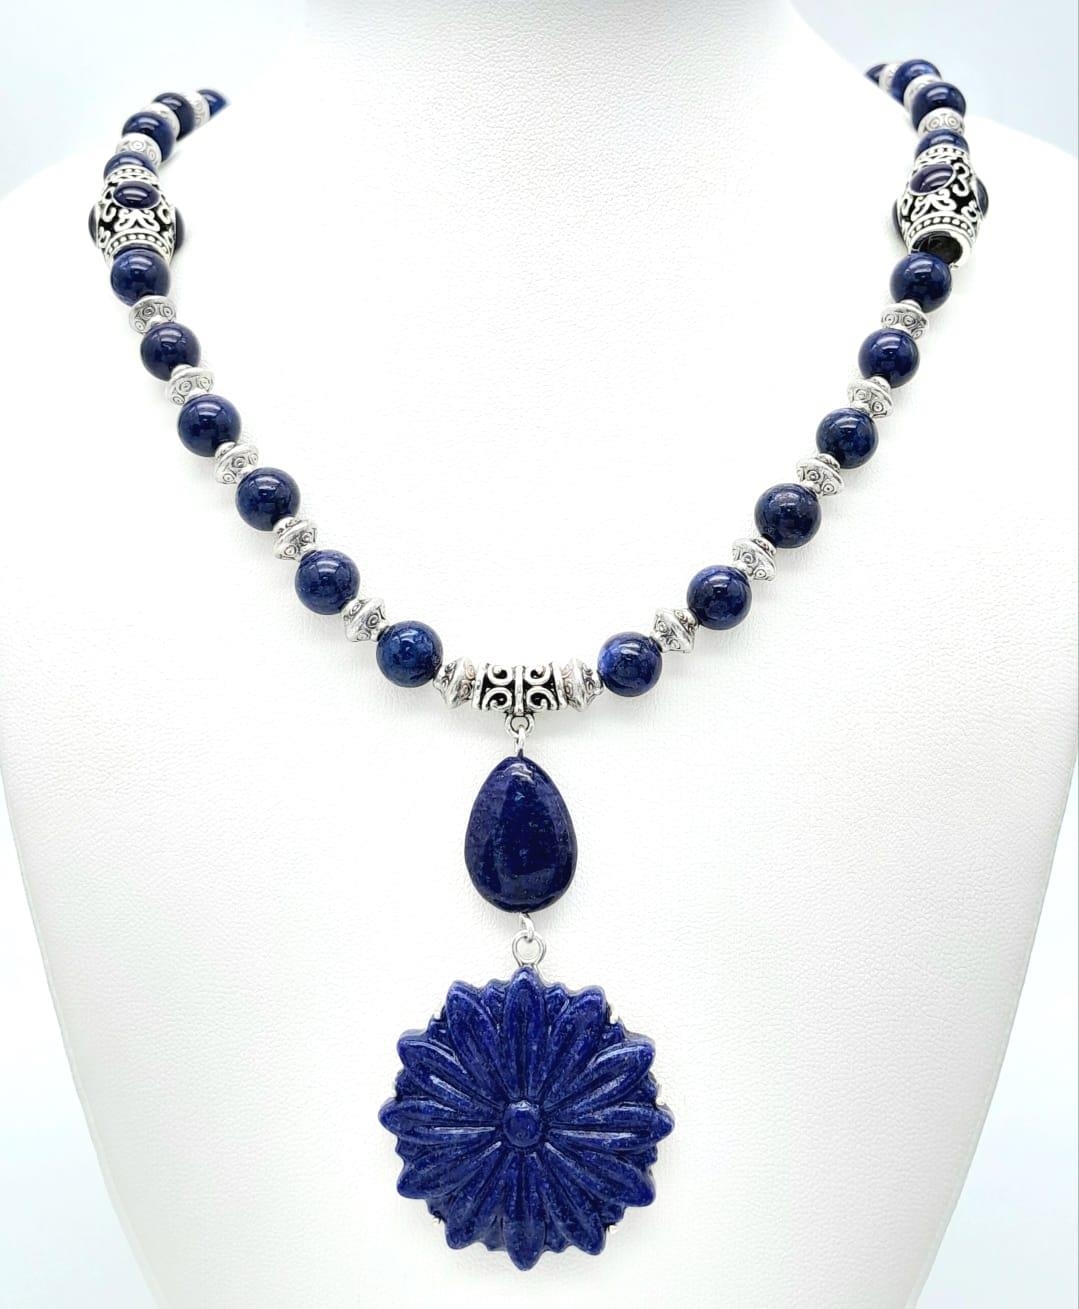 A Tibetan silver and lapis lazuli necklace and earrings set with large, carved, flower shaped discs. - Image 2 of 5